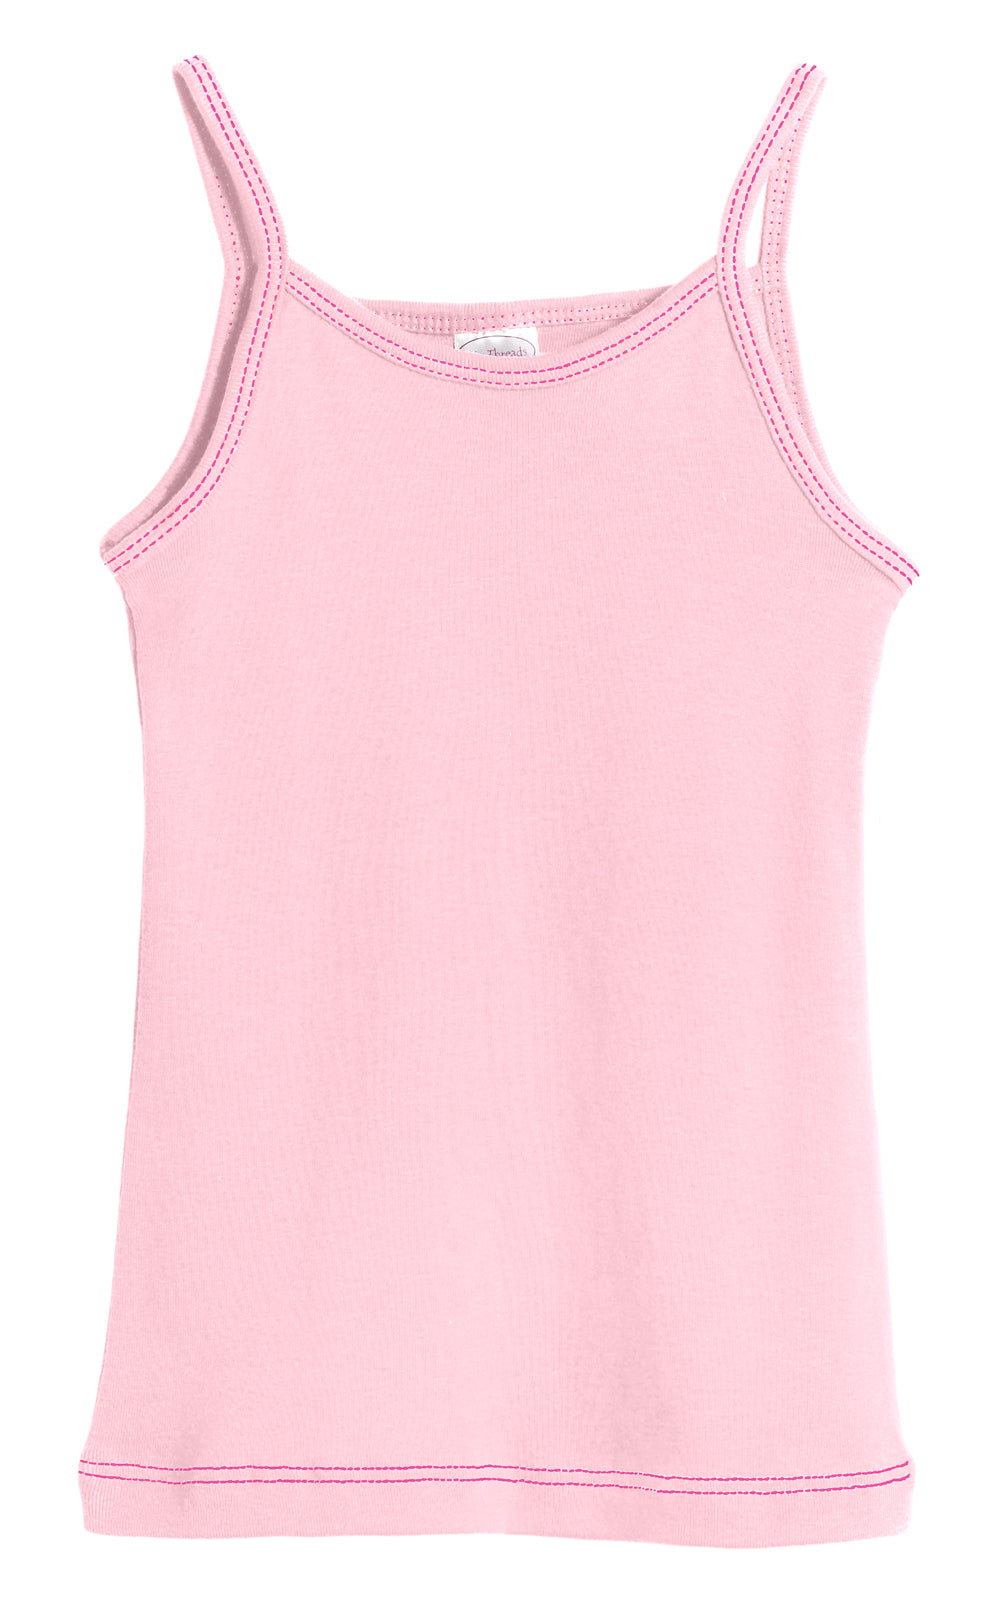  Swdarz Hot Pink Camisole for Girls 7-8 Cami Tank Top